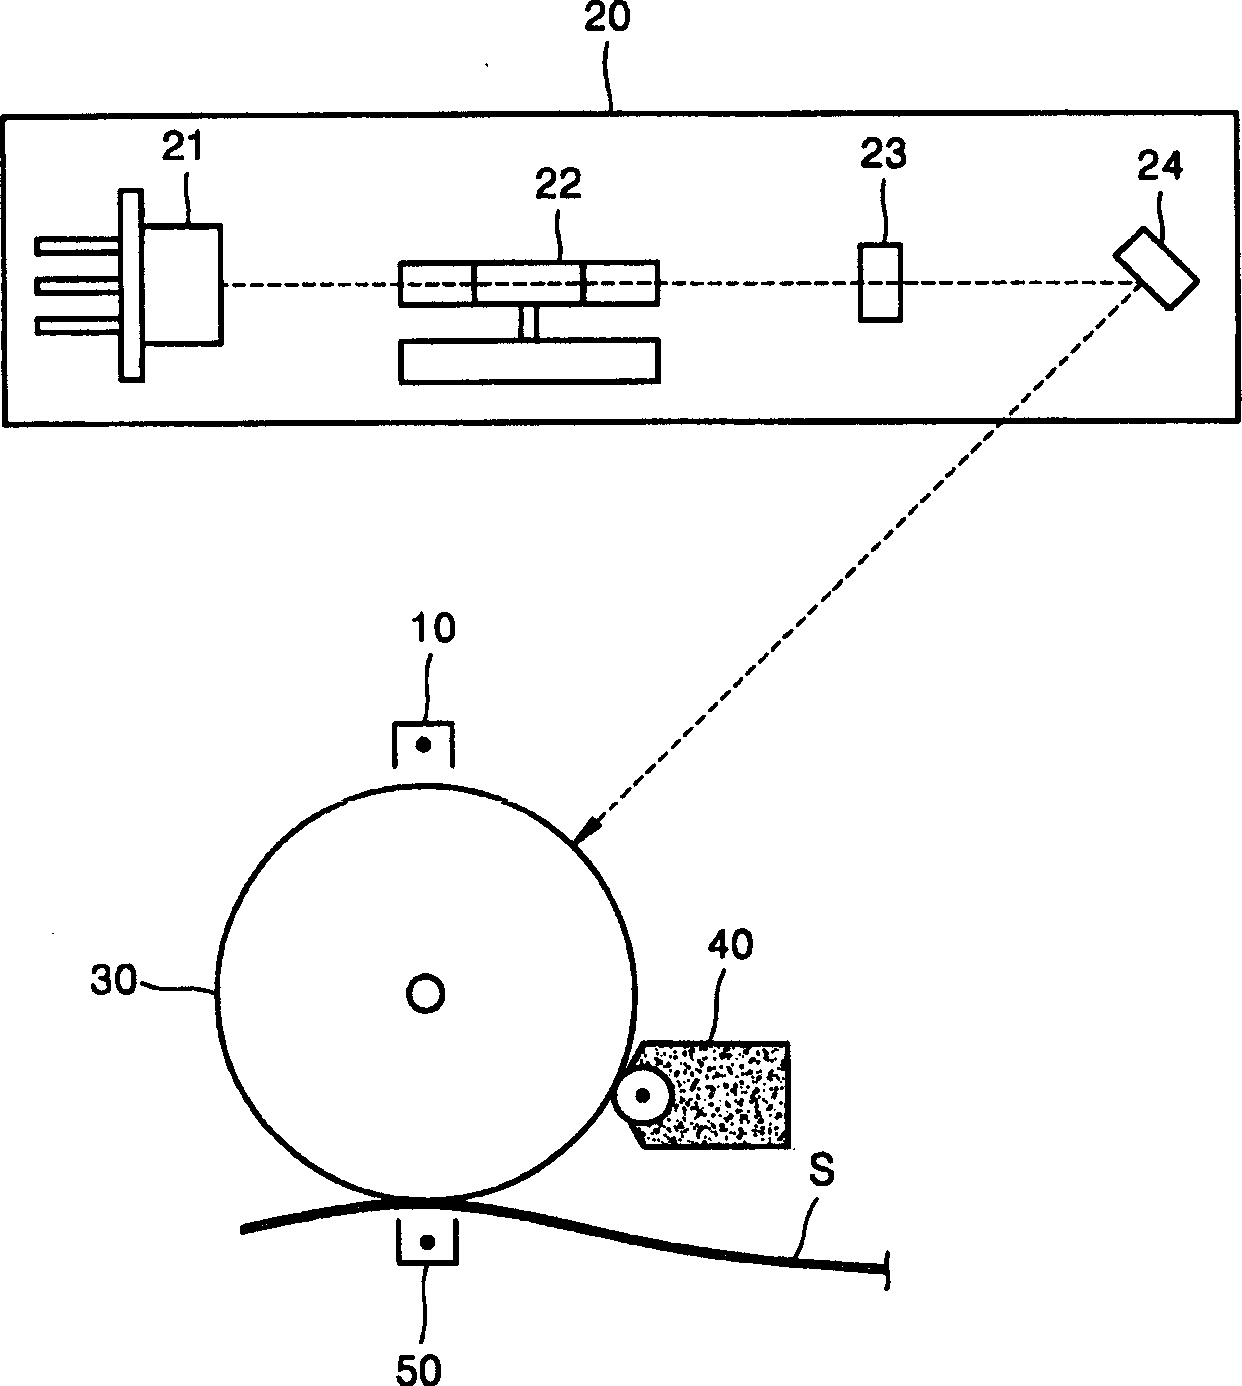 Method for reducing developer consumption and electronic photographic processor carrying out the same method